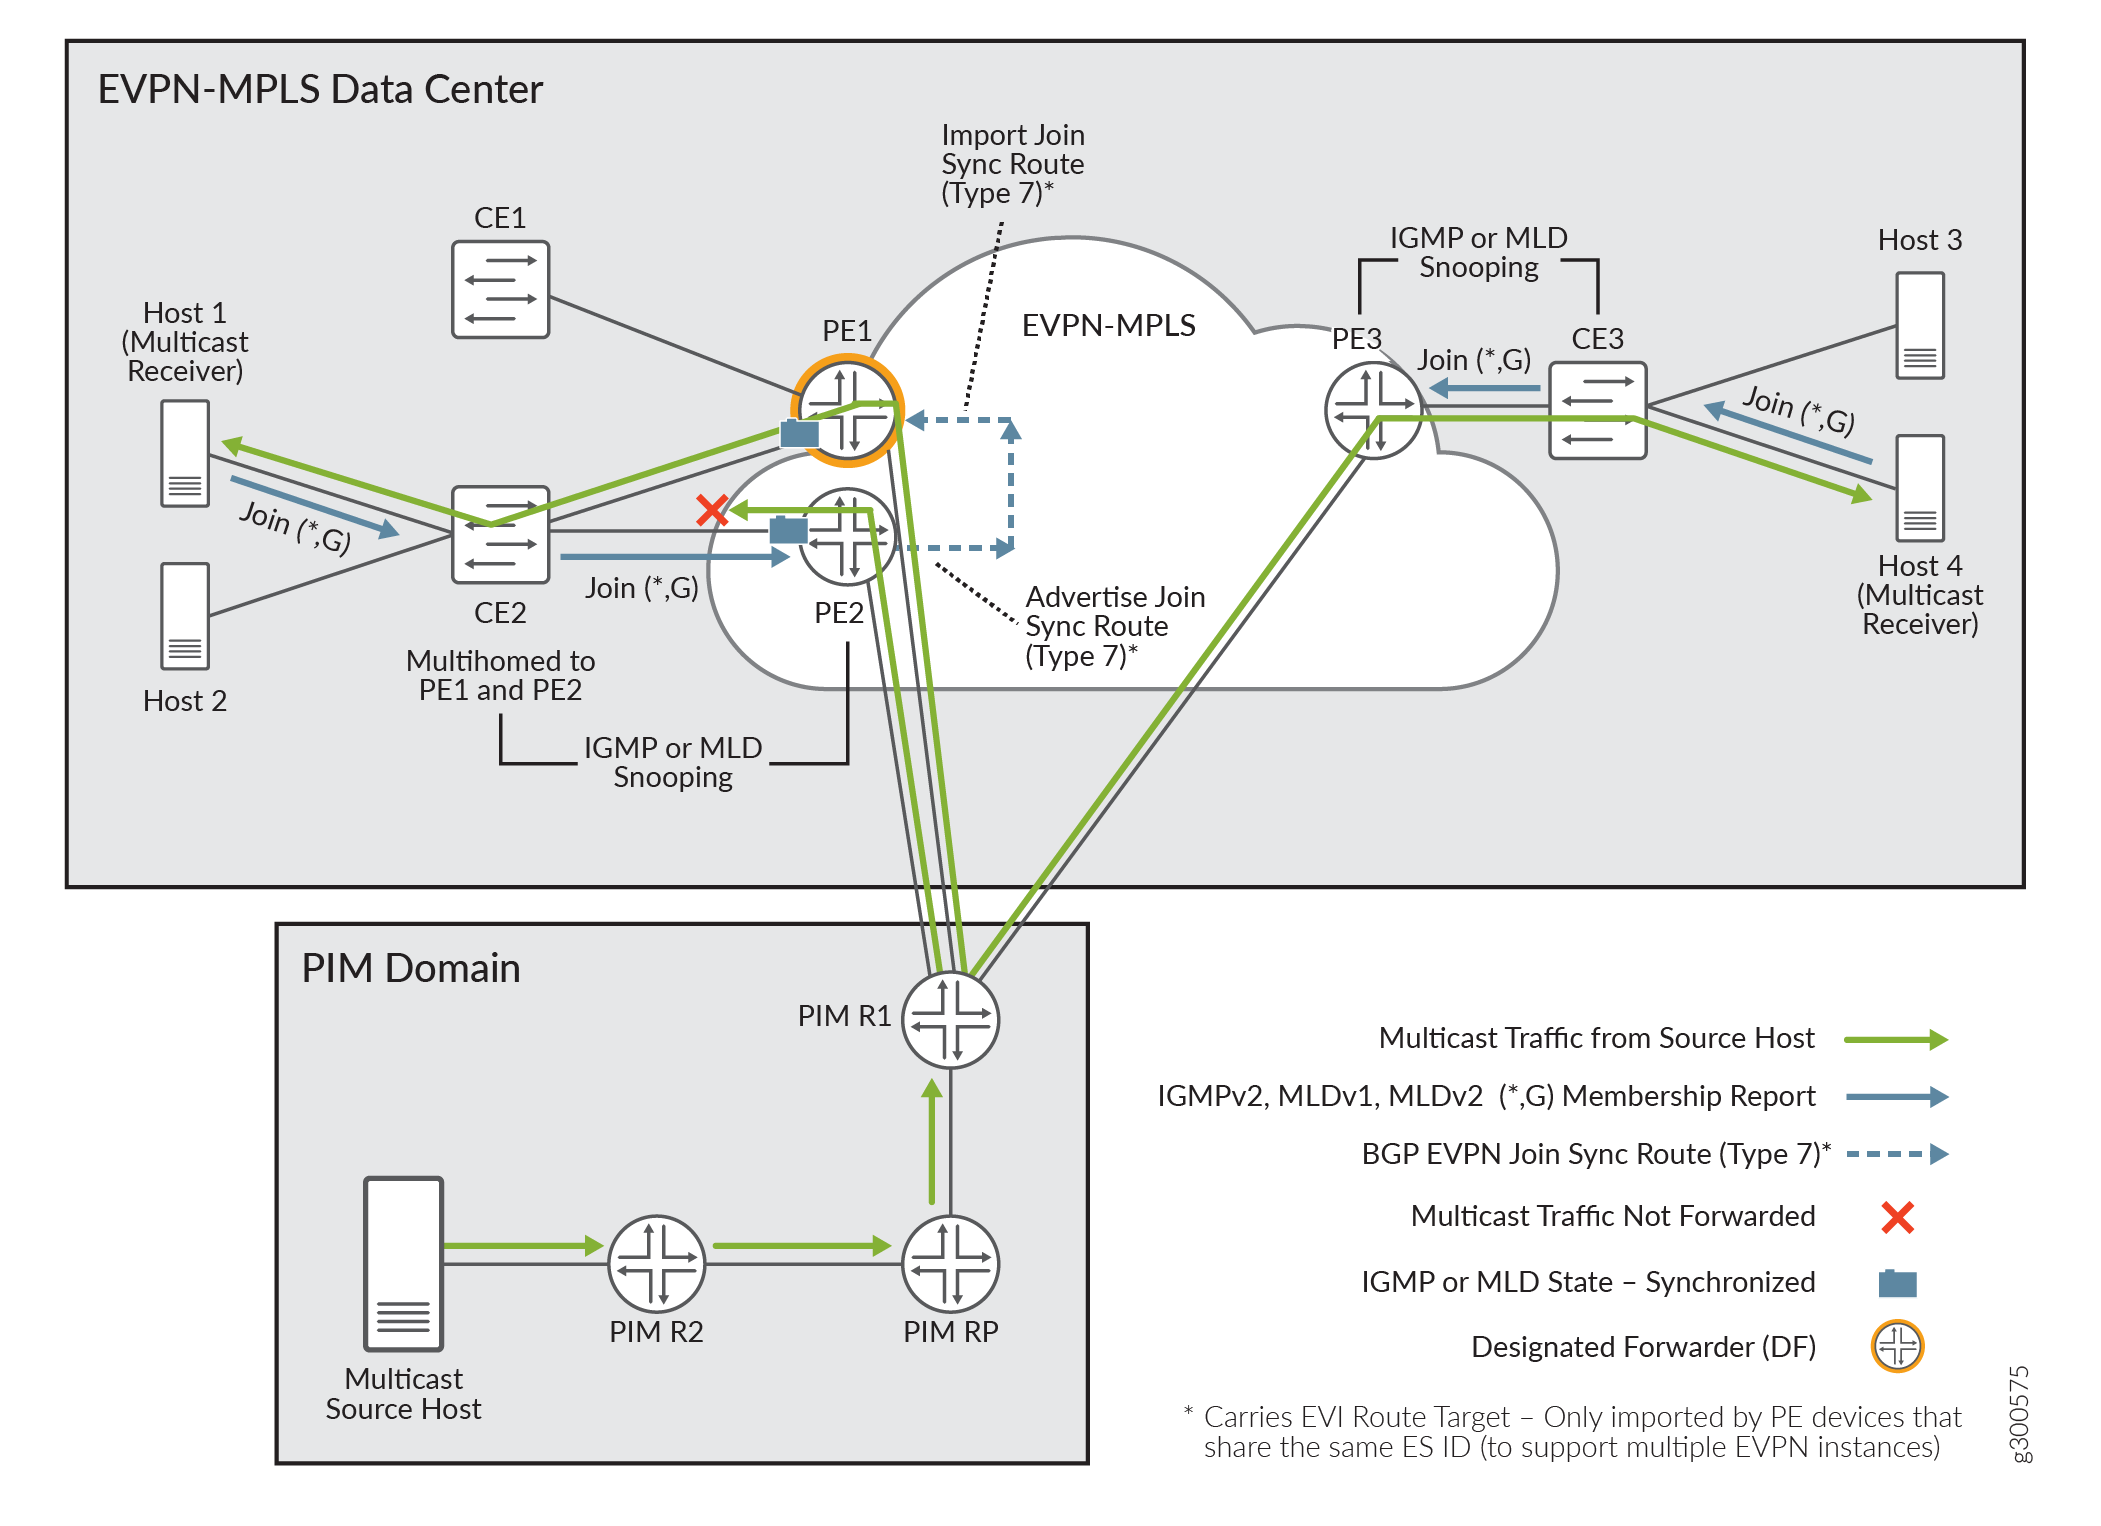 Multicast Forwarding for Multihomed Receivers in EVPN-MPLS on ACX Series Routers